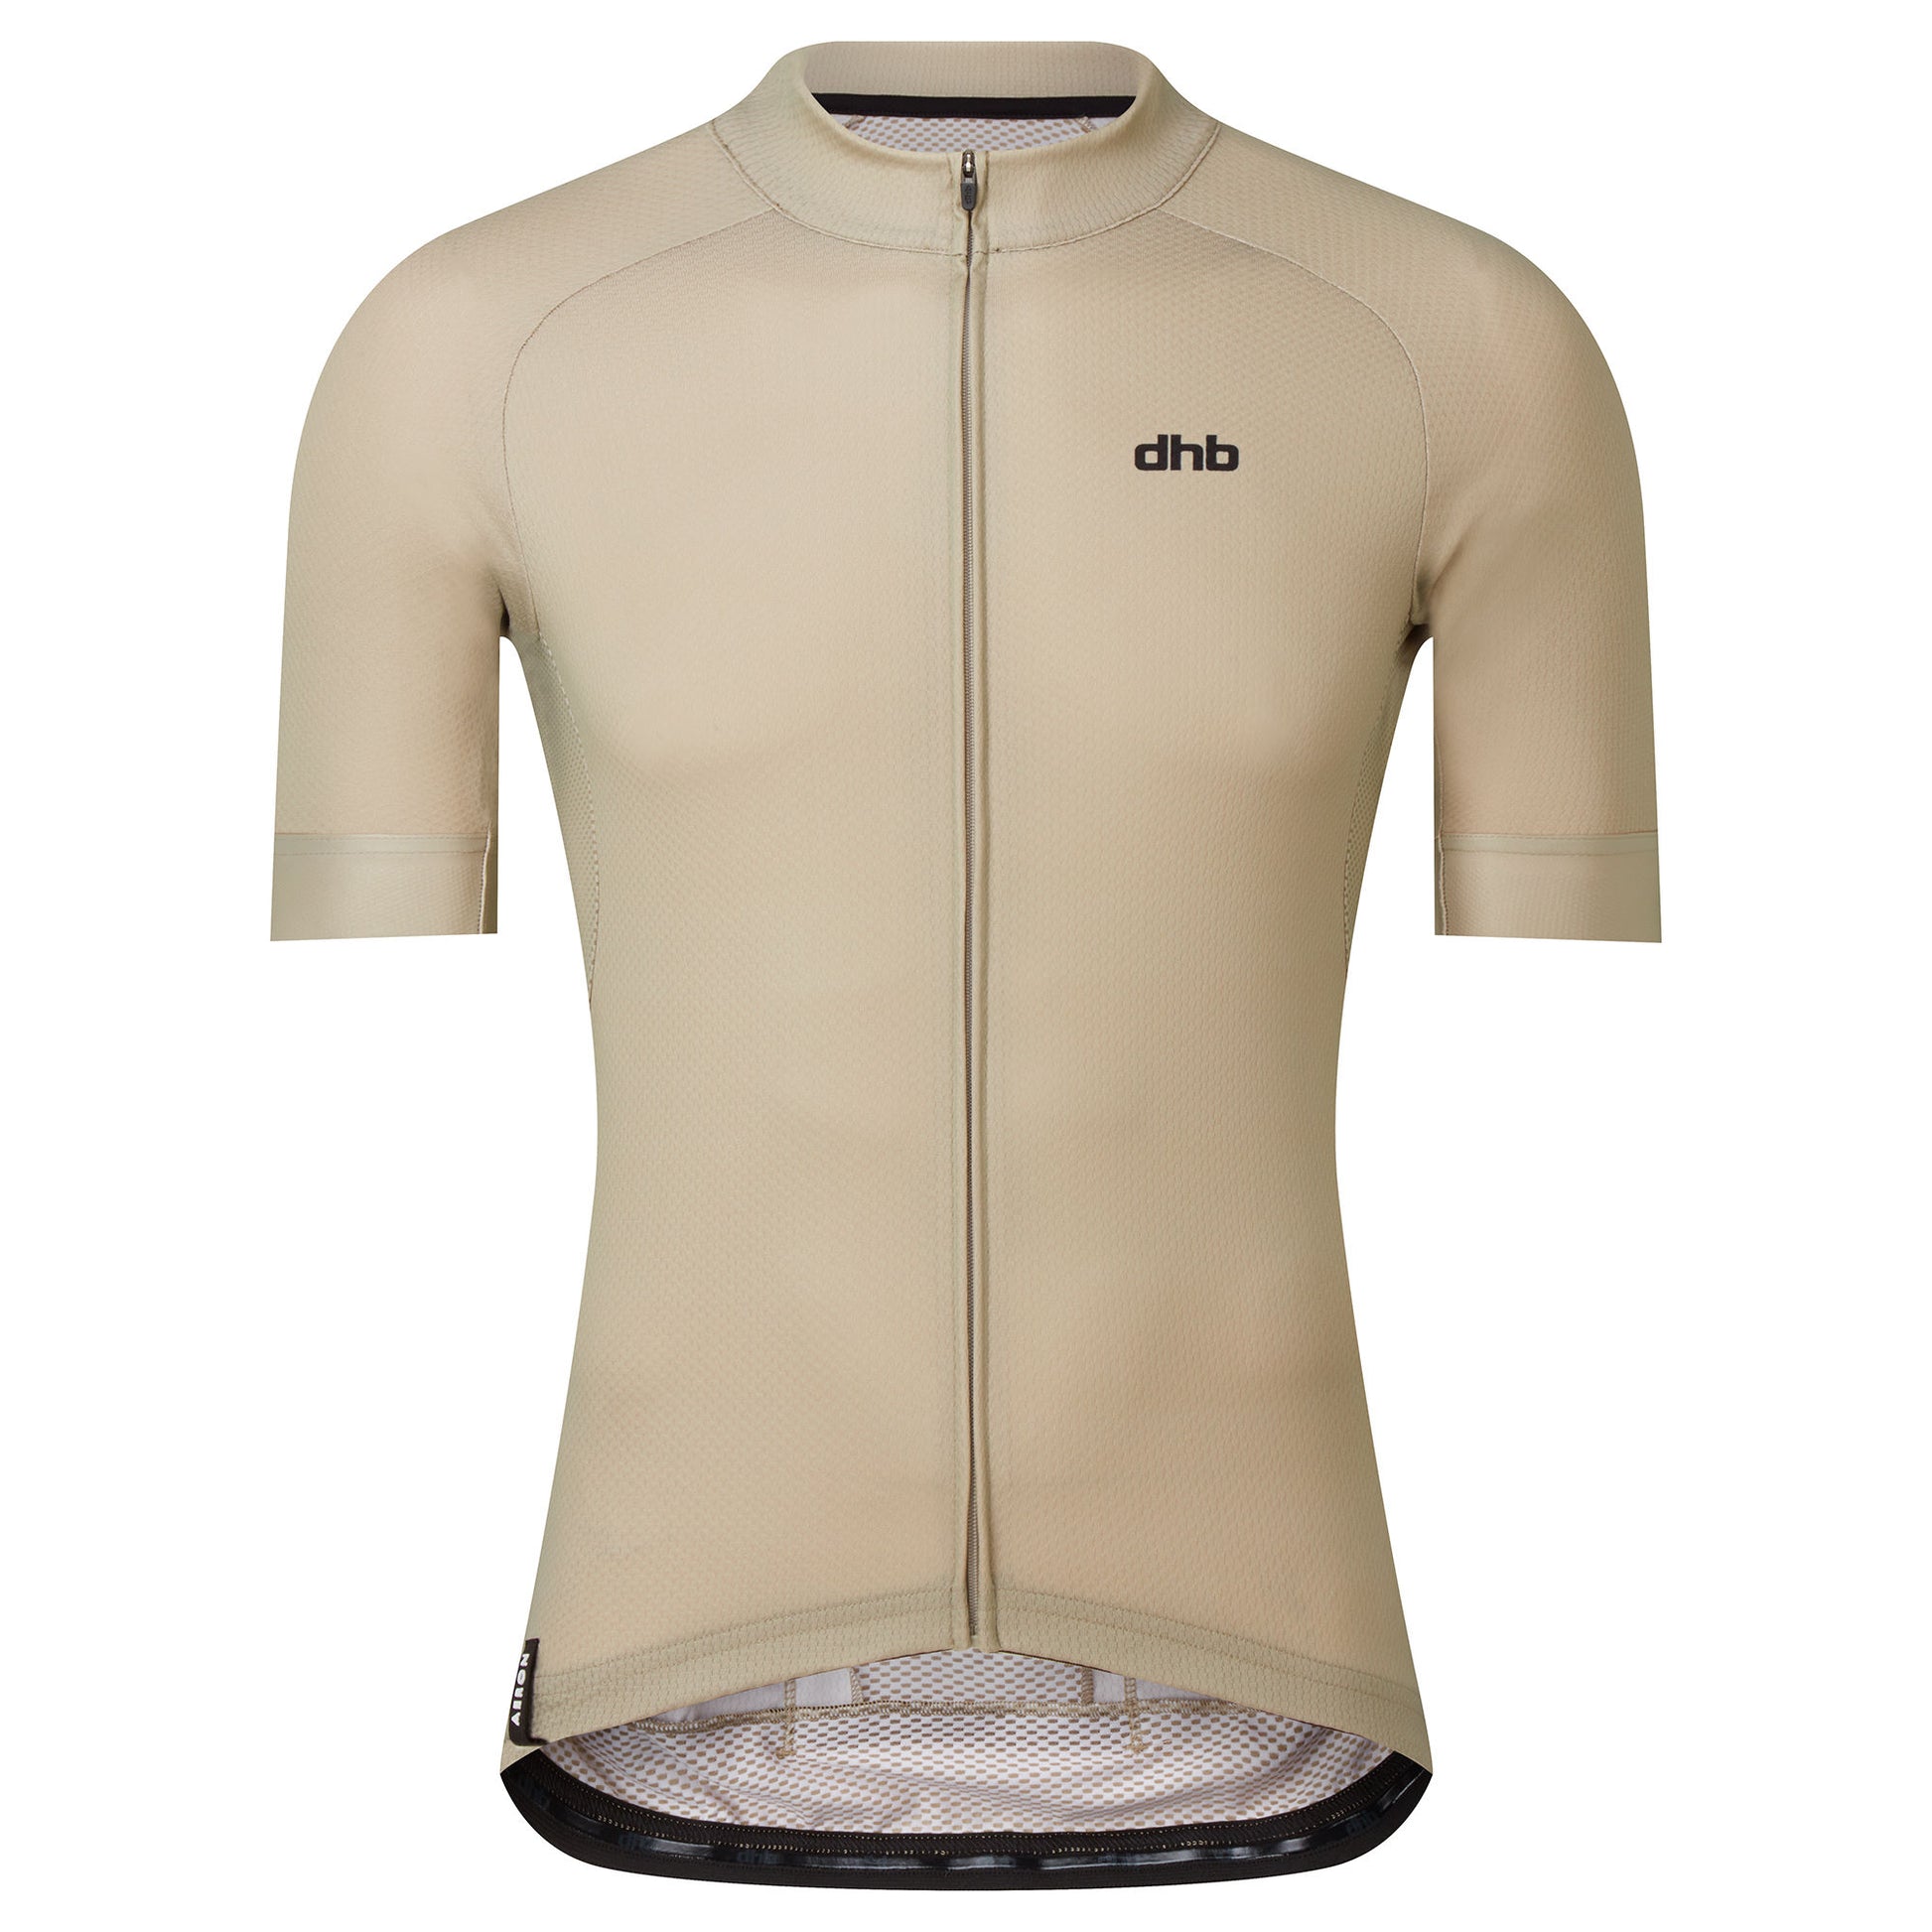 DHB Men's Aeron Short Sleeve Jersey - Beige buy online at Woolys Wheels Sydney with free delivery